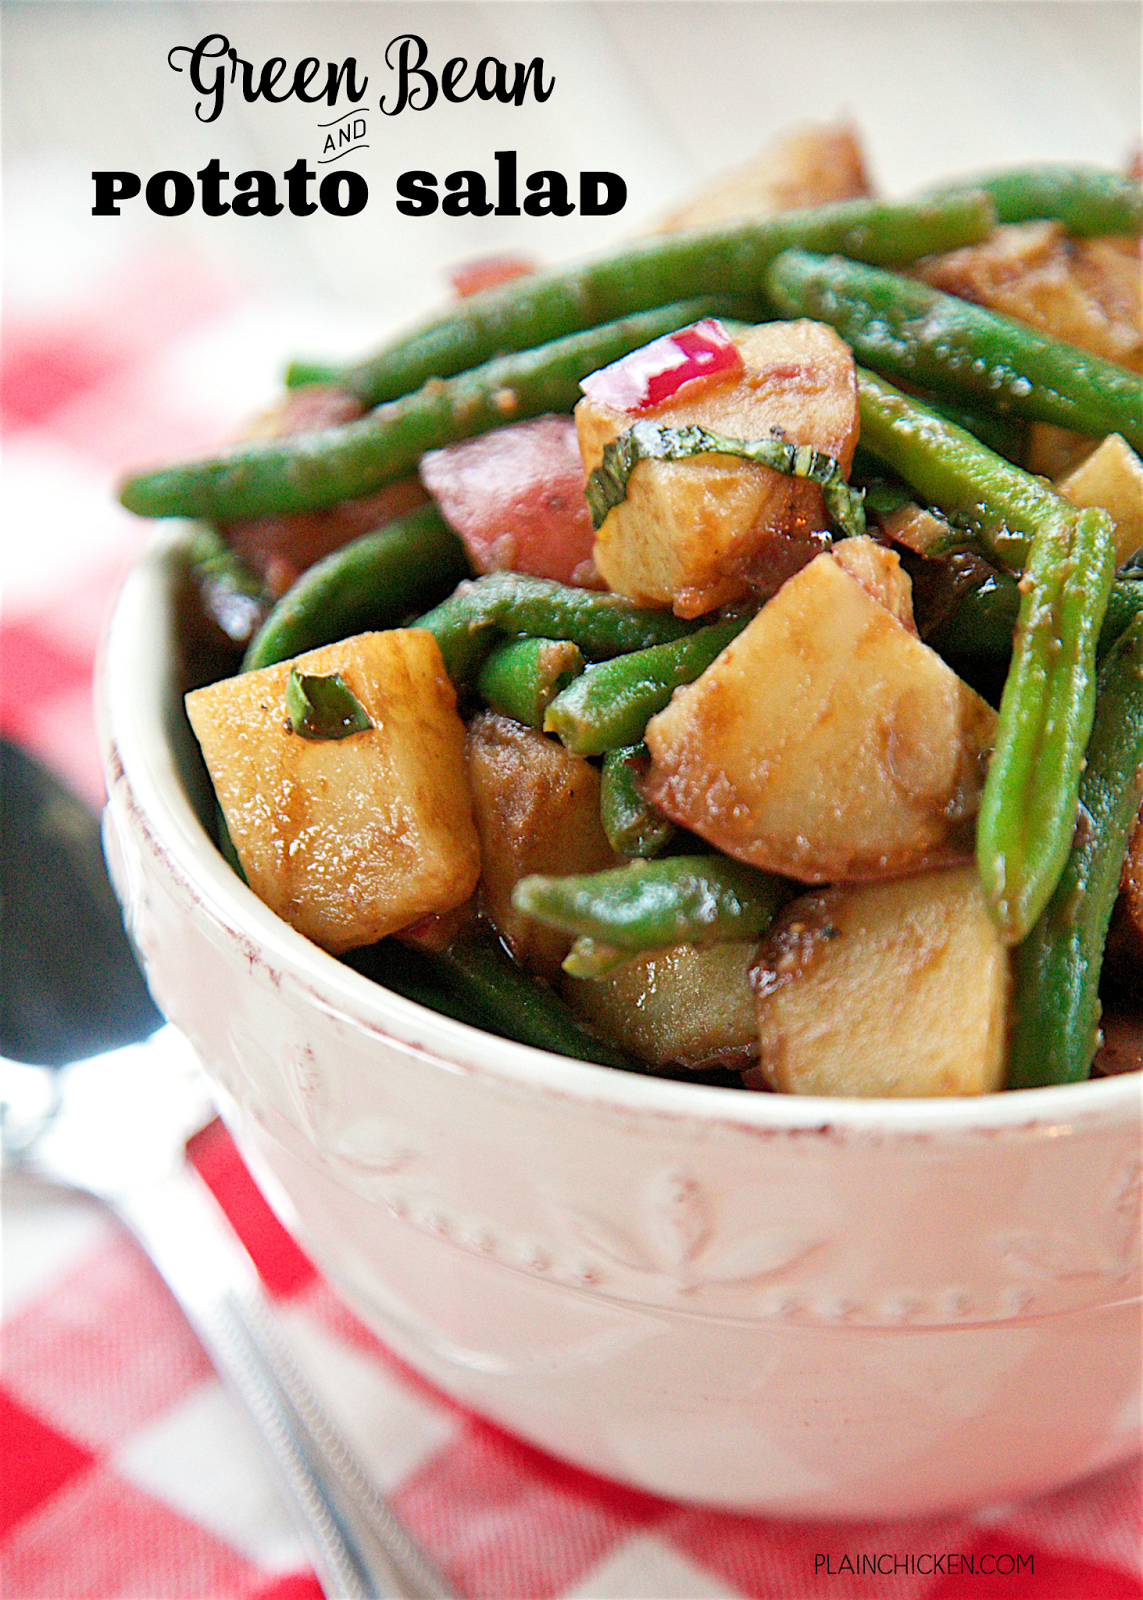 Green Bean and Potato Salad with Balsamic Vinaigrette - takes about 20 minutes to make! Can serve warm or cold. Green beans, red potatoes, red onion, basil, olive oil, balsamic vinegar, dijon mustard, lemon juice, worcestershire sauce and garlic. Great side dish for summer cookouts! Everyone loved it!